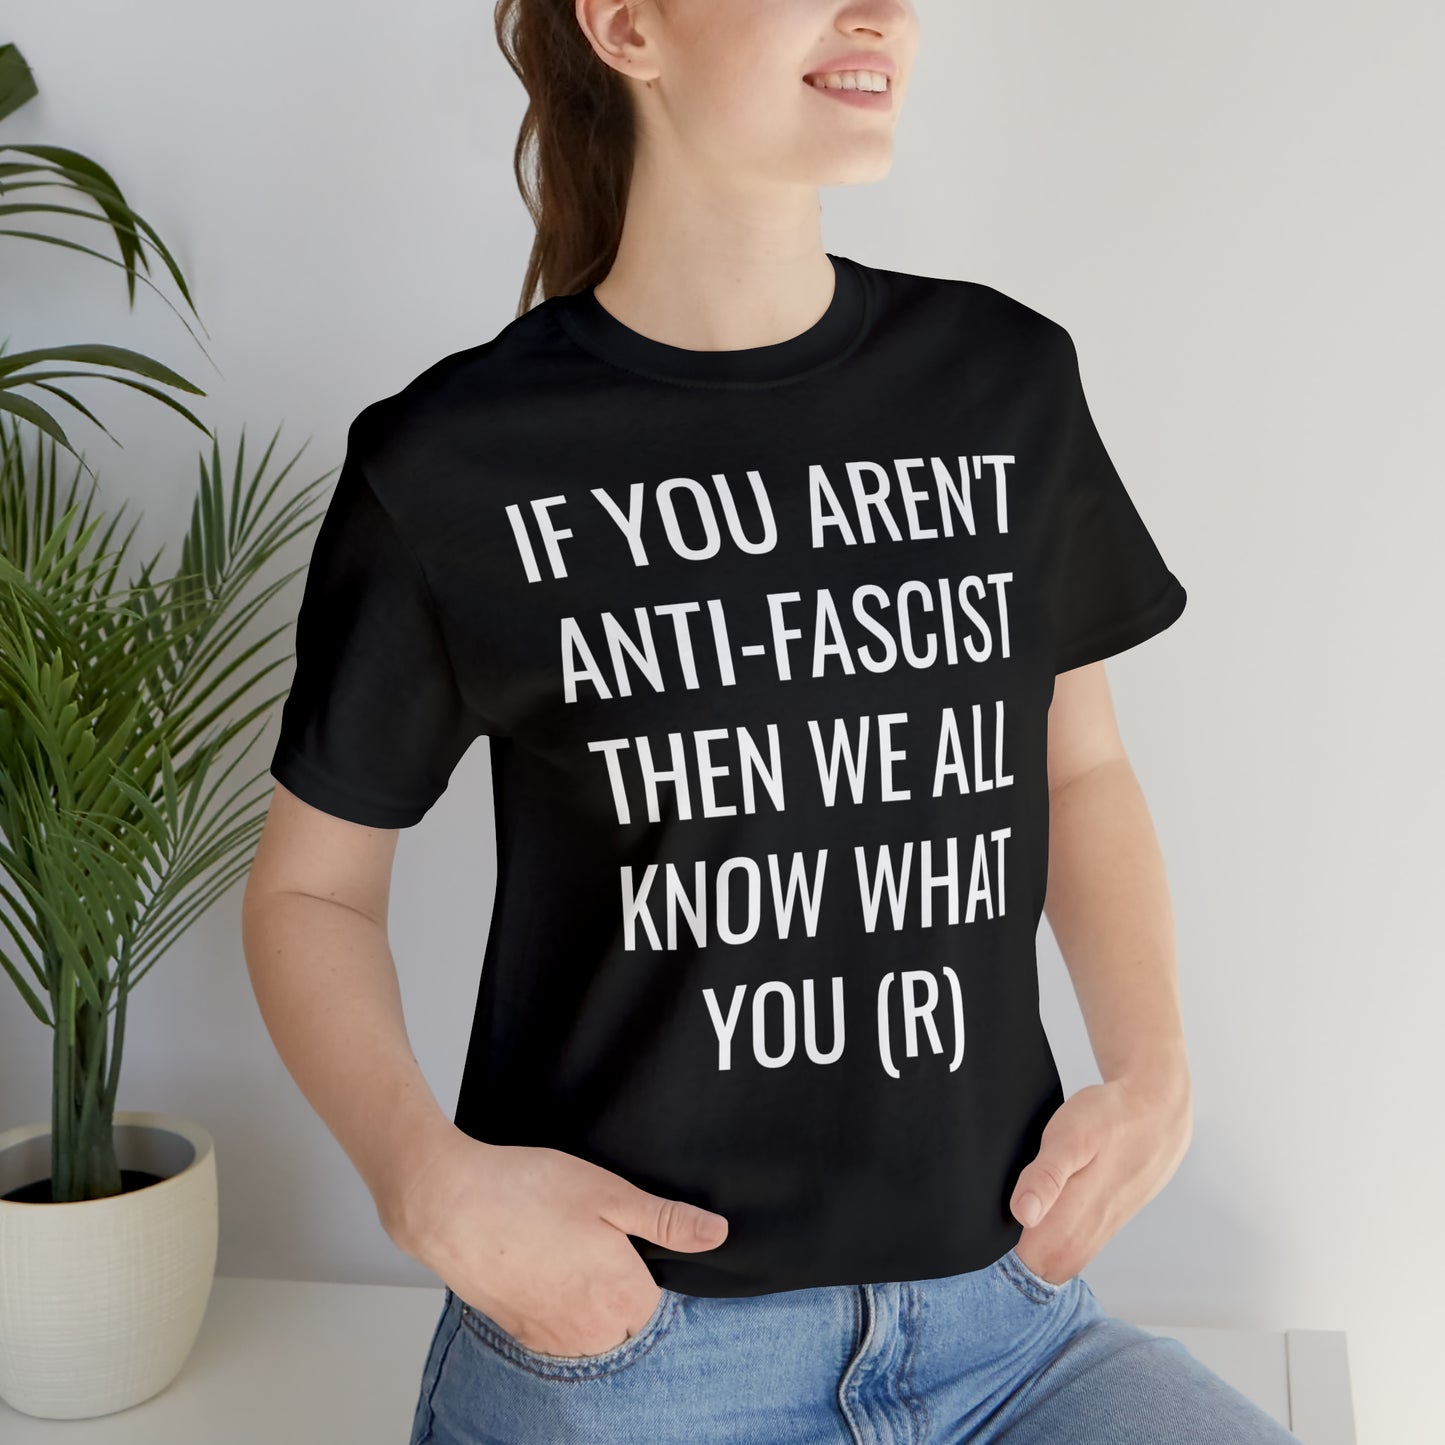 We Know What You (R) Unisex Jersey Short Sleeve Black Tee (SirTalksALot Exclusive)